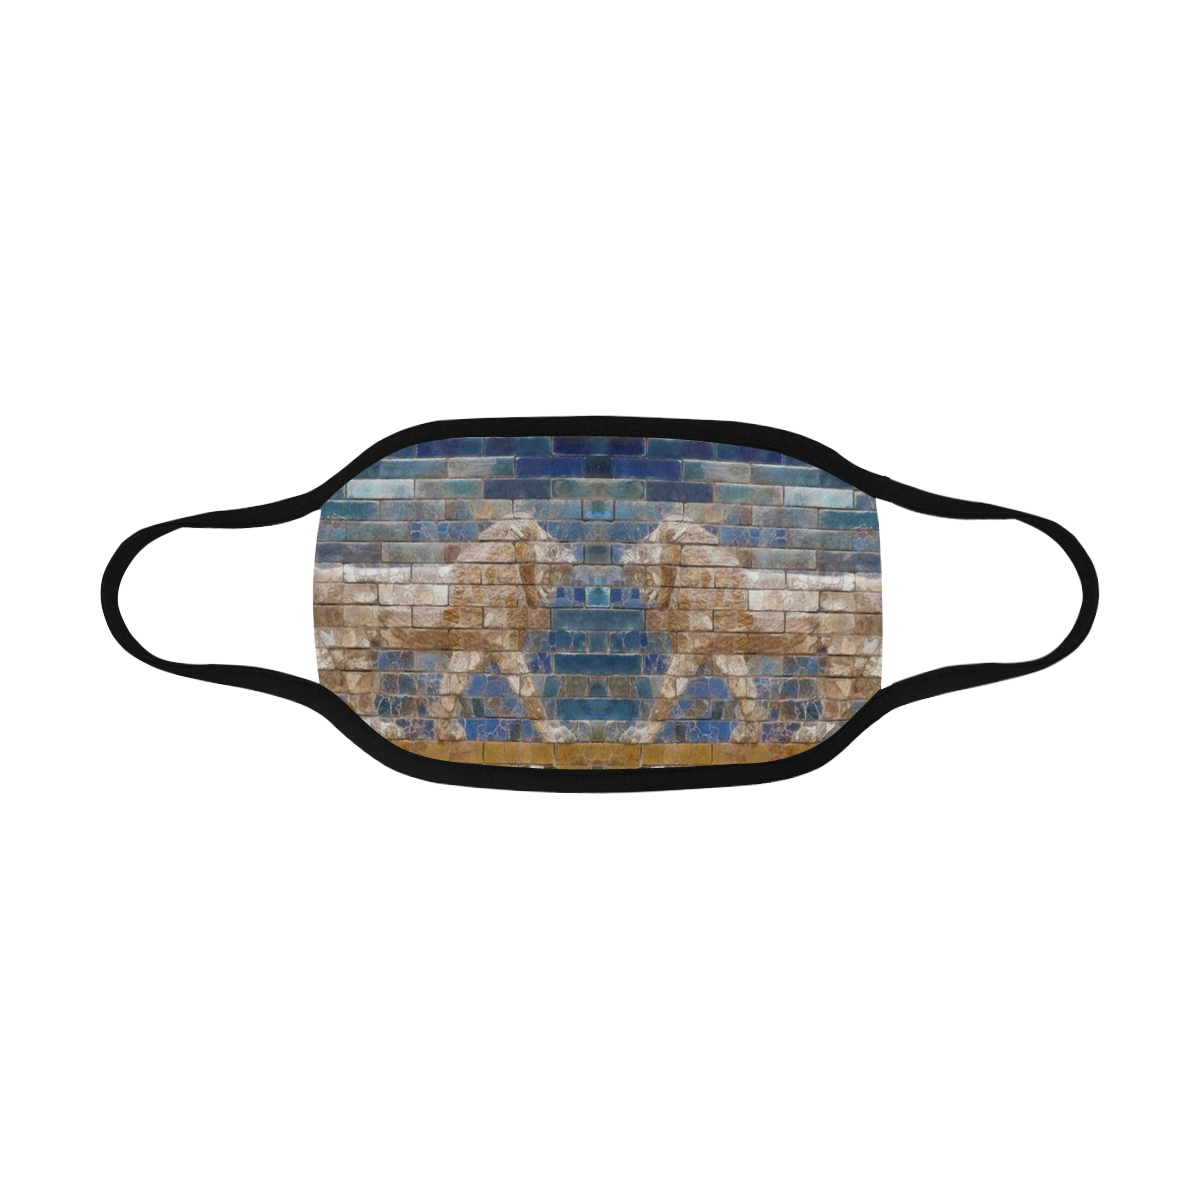 Lions of Babylon Mouth Mask